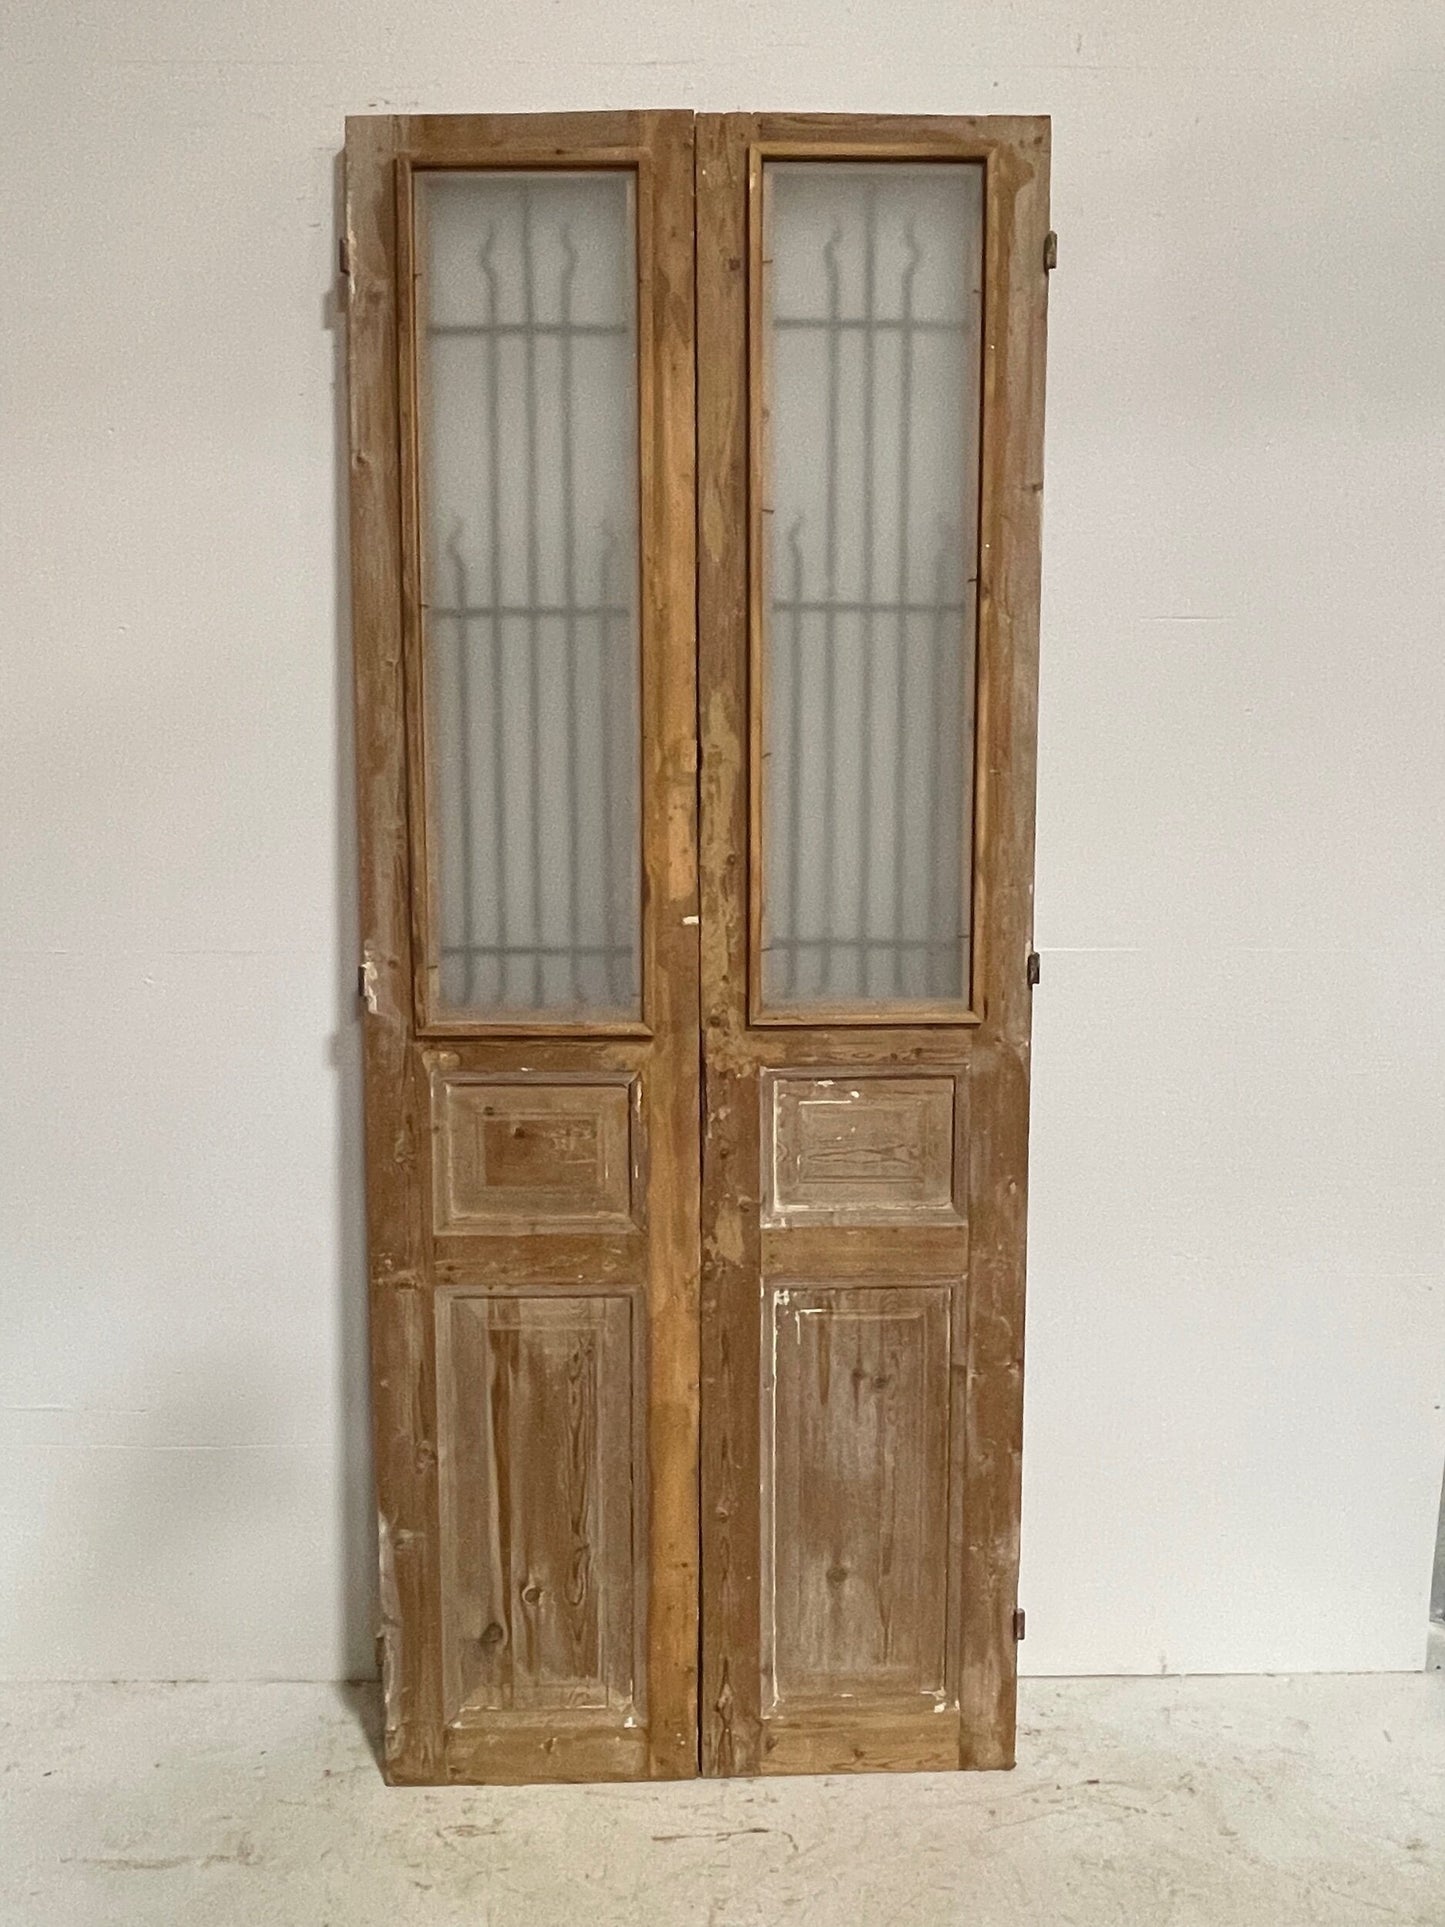 Antique French door (92.5x36.75) with iron G1034s